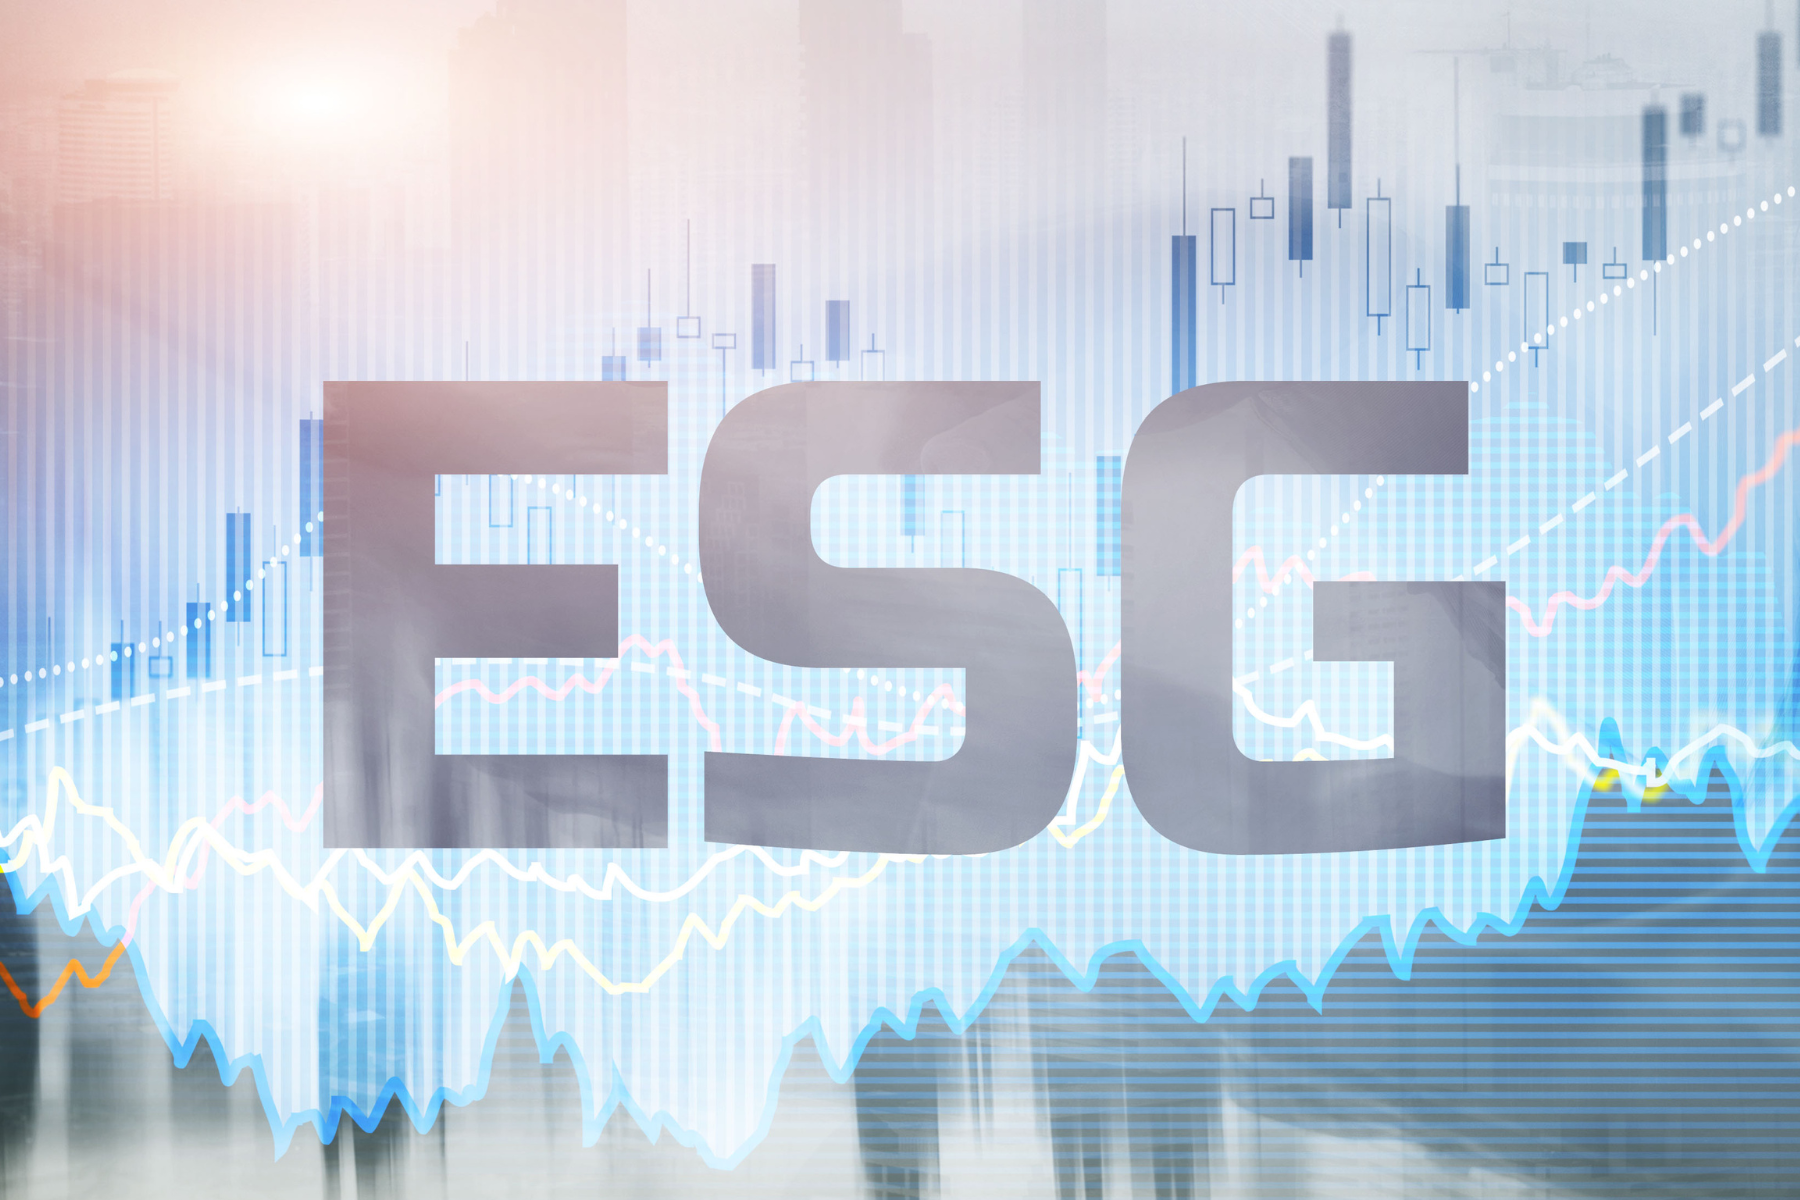 Fuzzy criteria means ESG is always going to be subjective